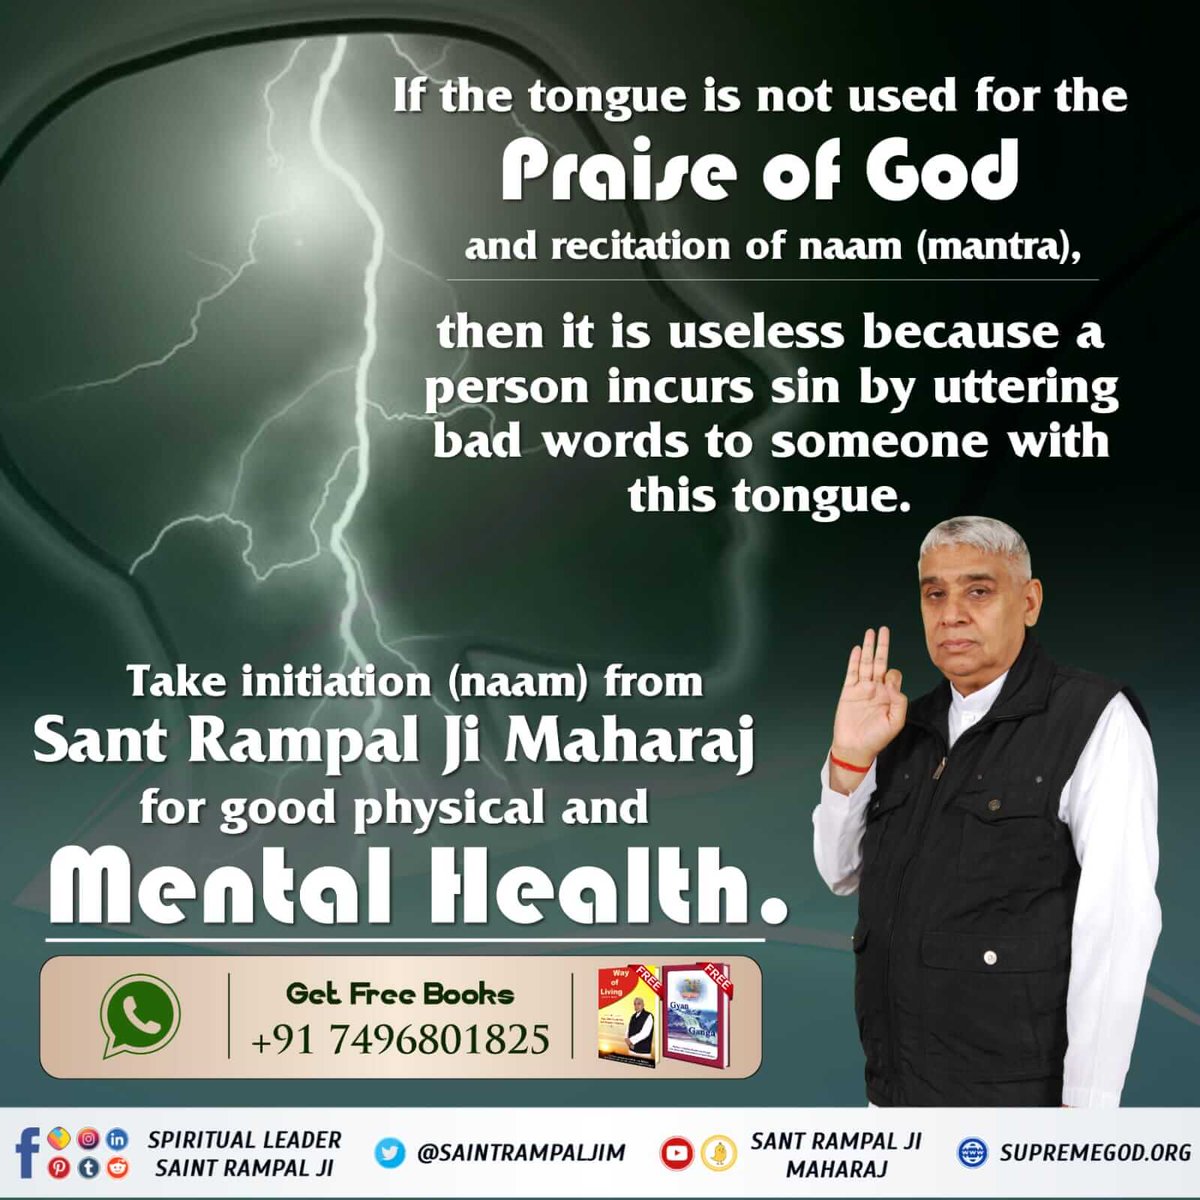 #GodMorningWednesday 
If the tougue is not used for the
Praise of God
and recitation of naam (mantras),
then it is useless because a person incurs sin by uttering band words to someone with this tongue.
@SaintRampalJiM 
Visit Saint Rampal Ji Maharaj YouTube Channel
#Wednesdayvibe